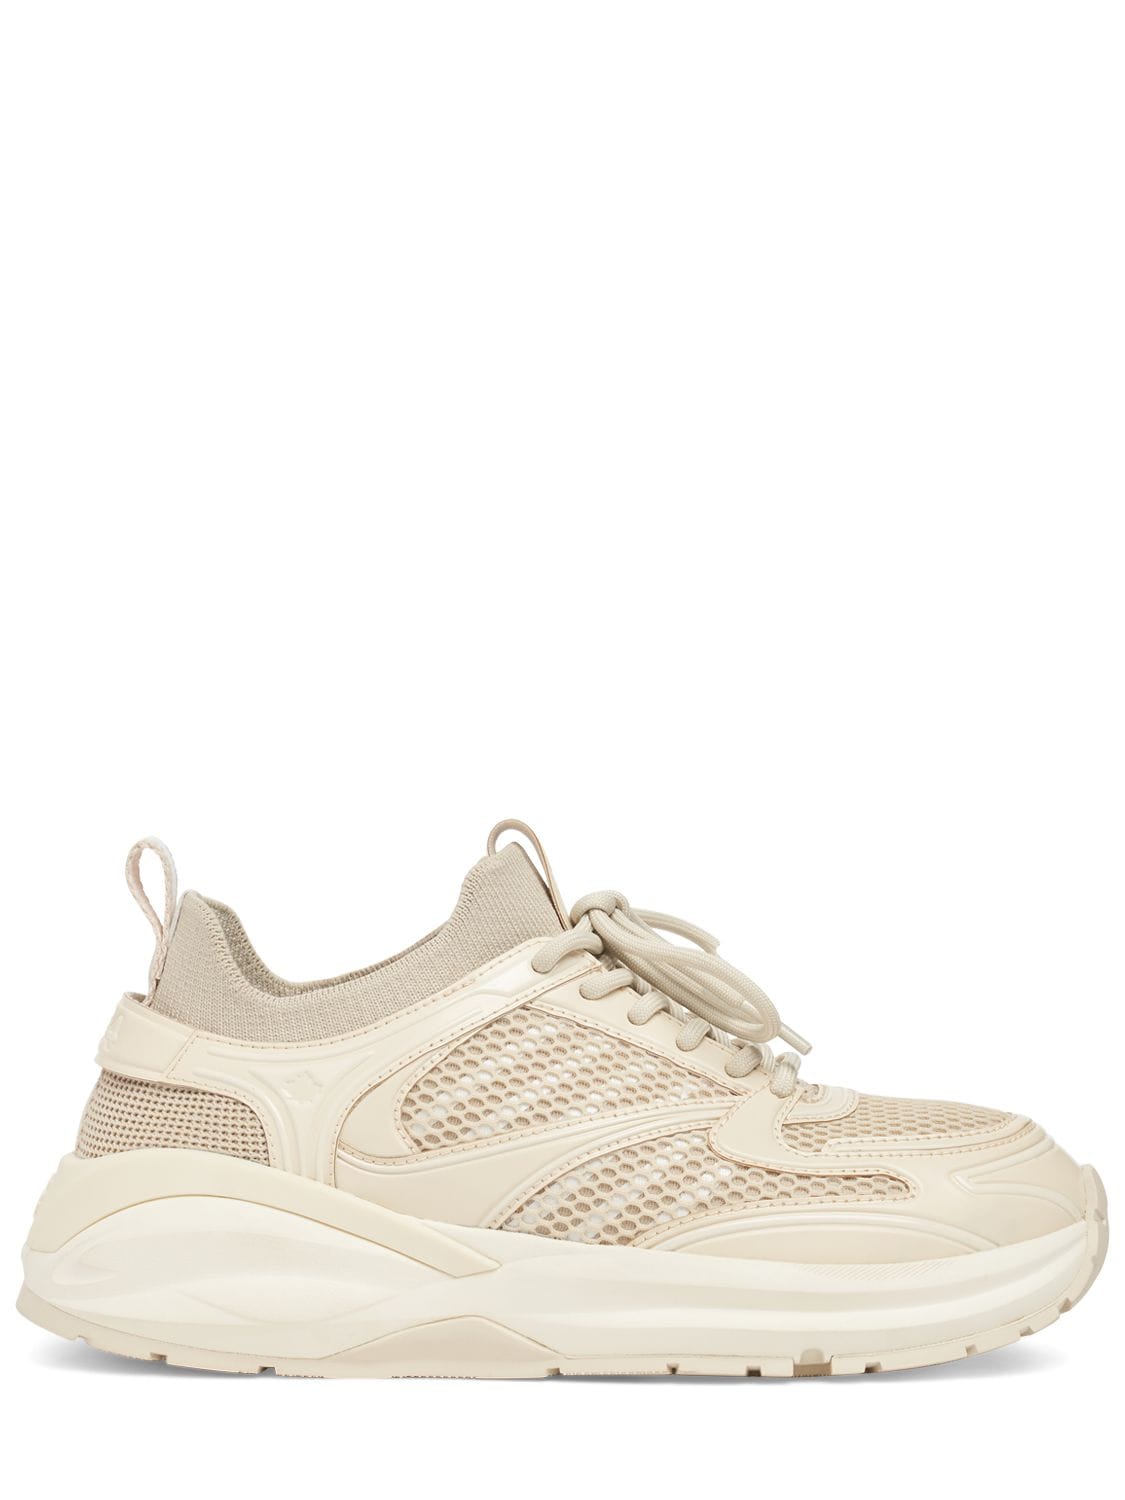 Dsquared2 Dash Leather & Mesh Sneakers In Beige